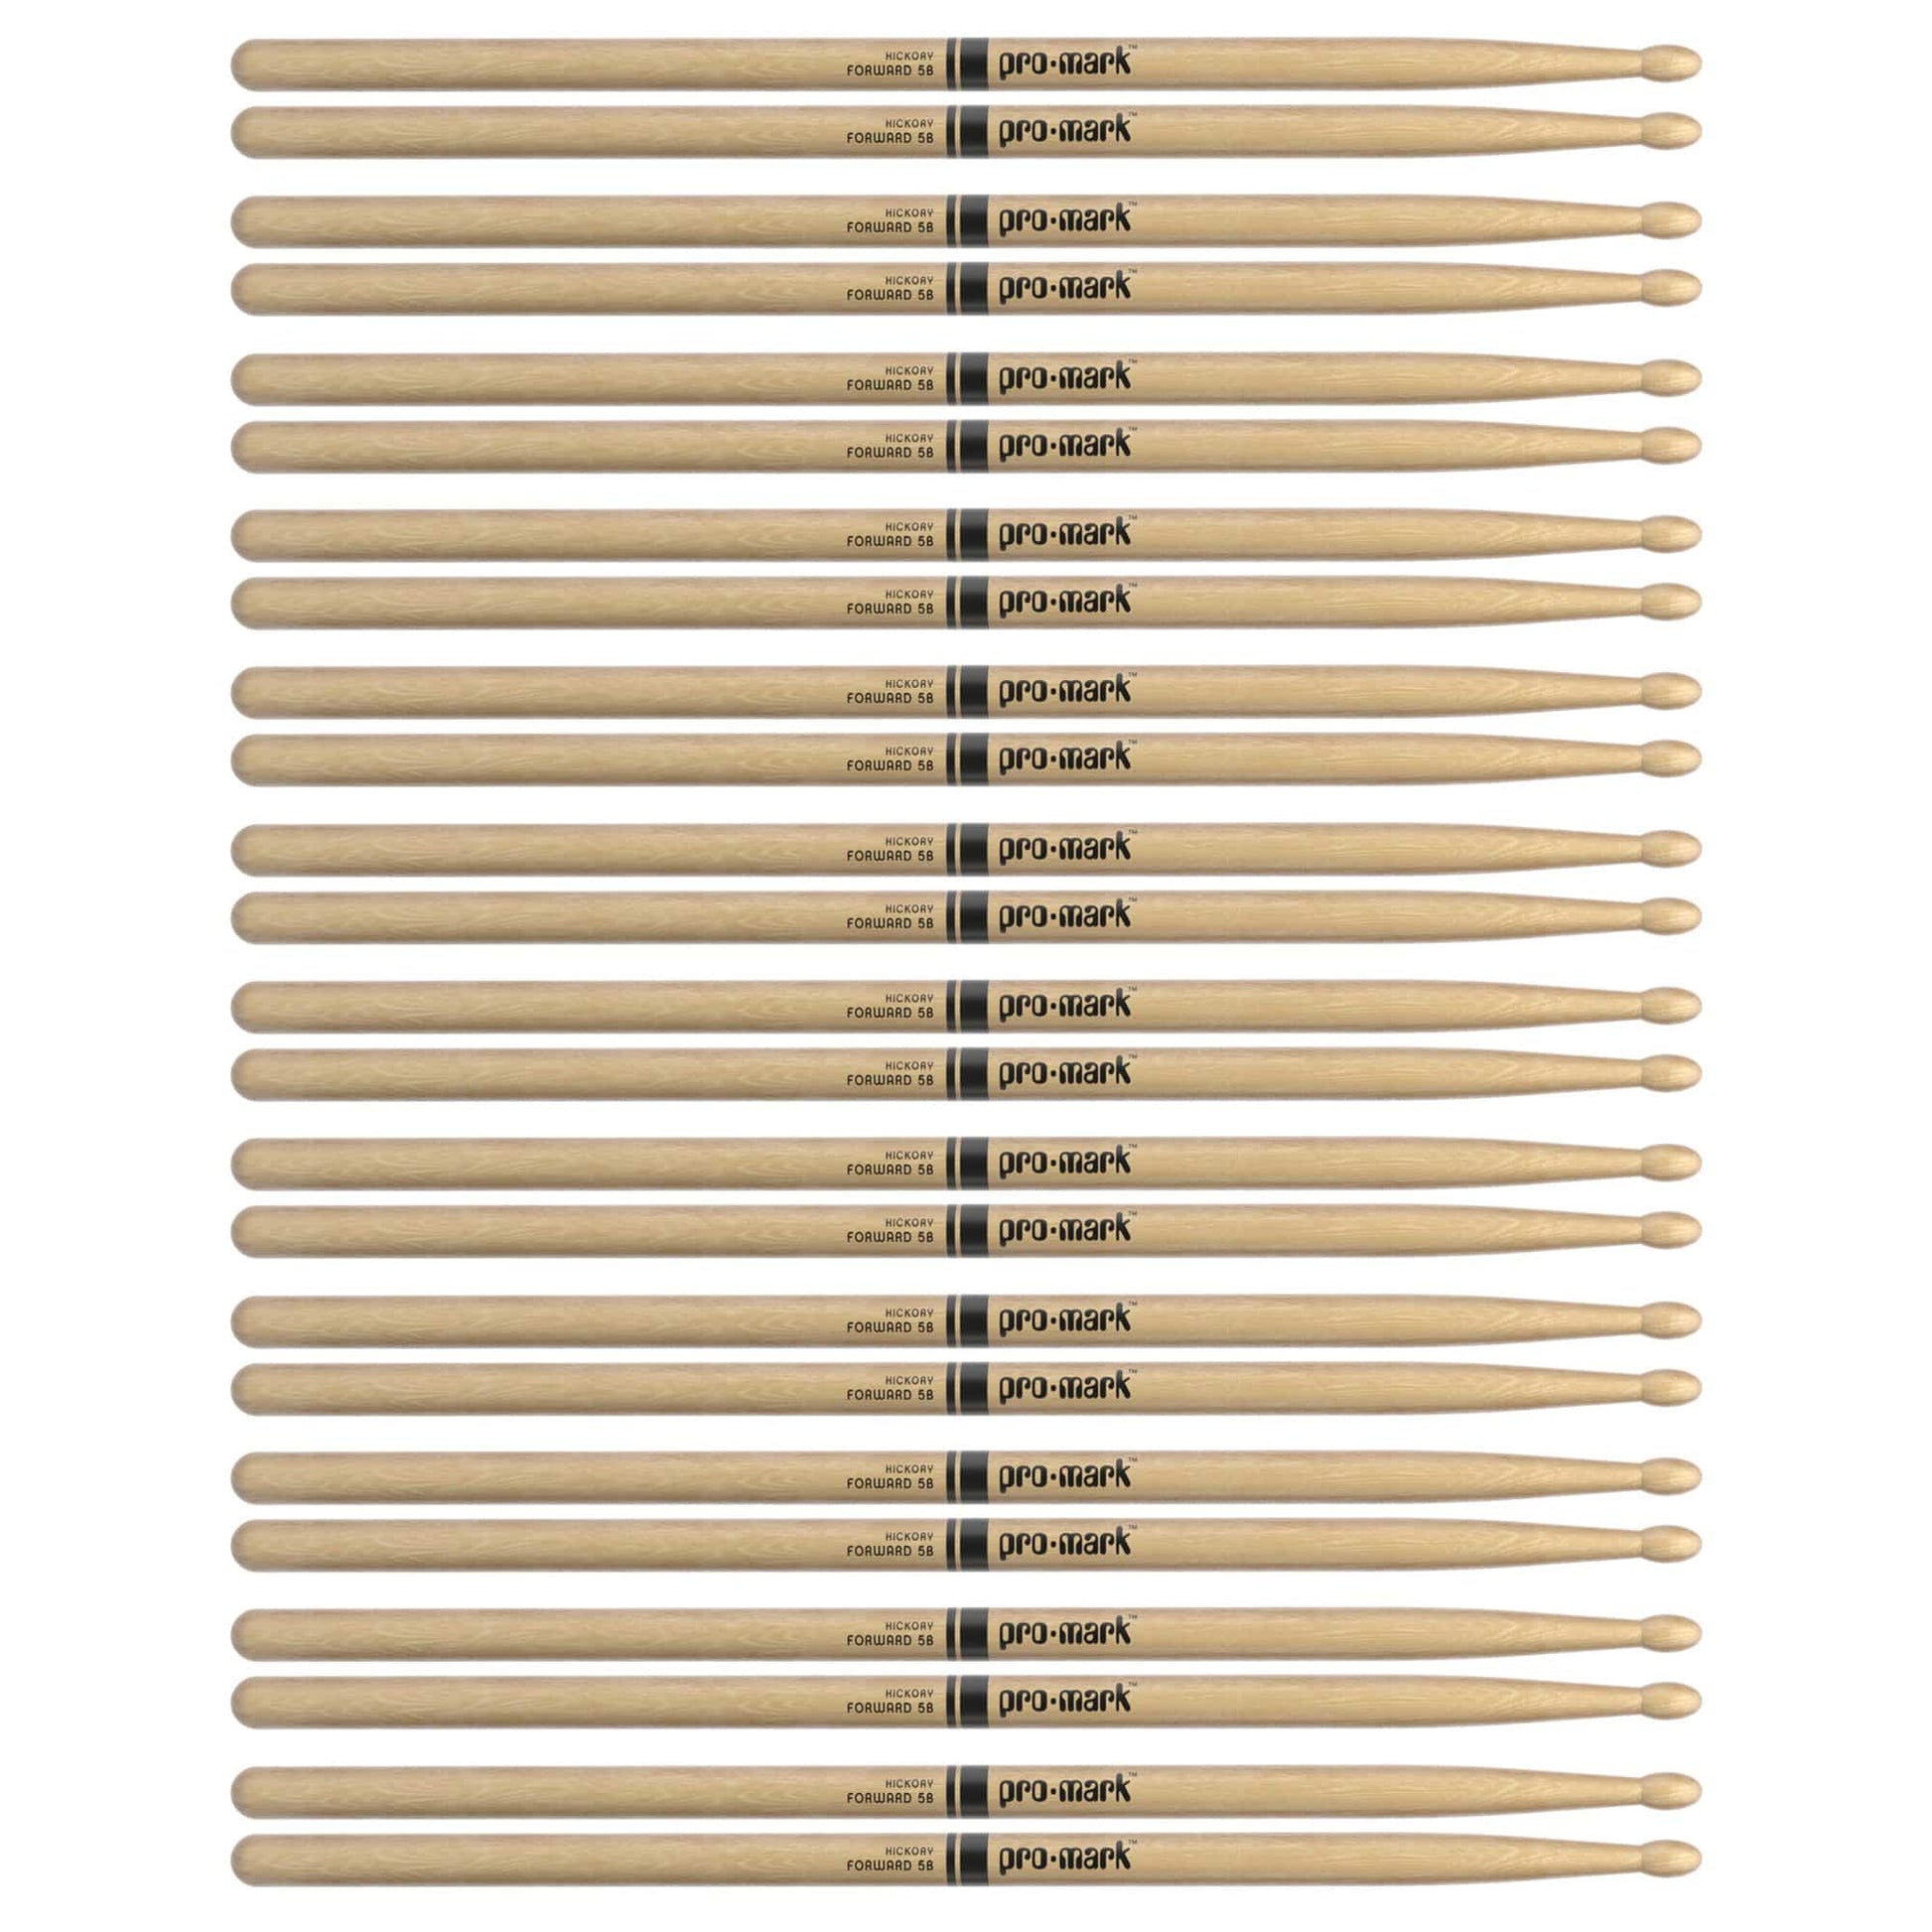 Promark American Hickory 5B Wood Tip Drum Sticks (12 Pair Bundle) Drums and Percussion / Parts and Accessories / Drum Sticks and Mallets